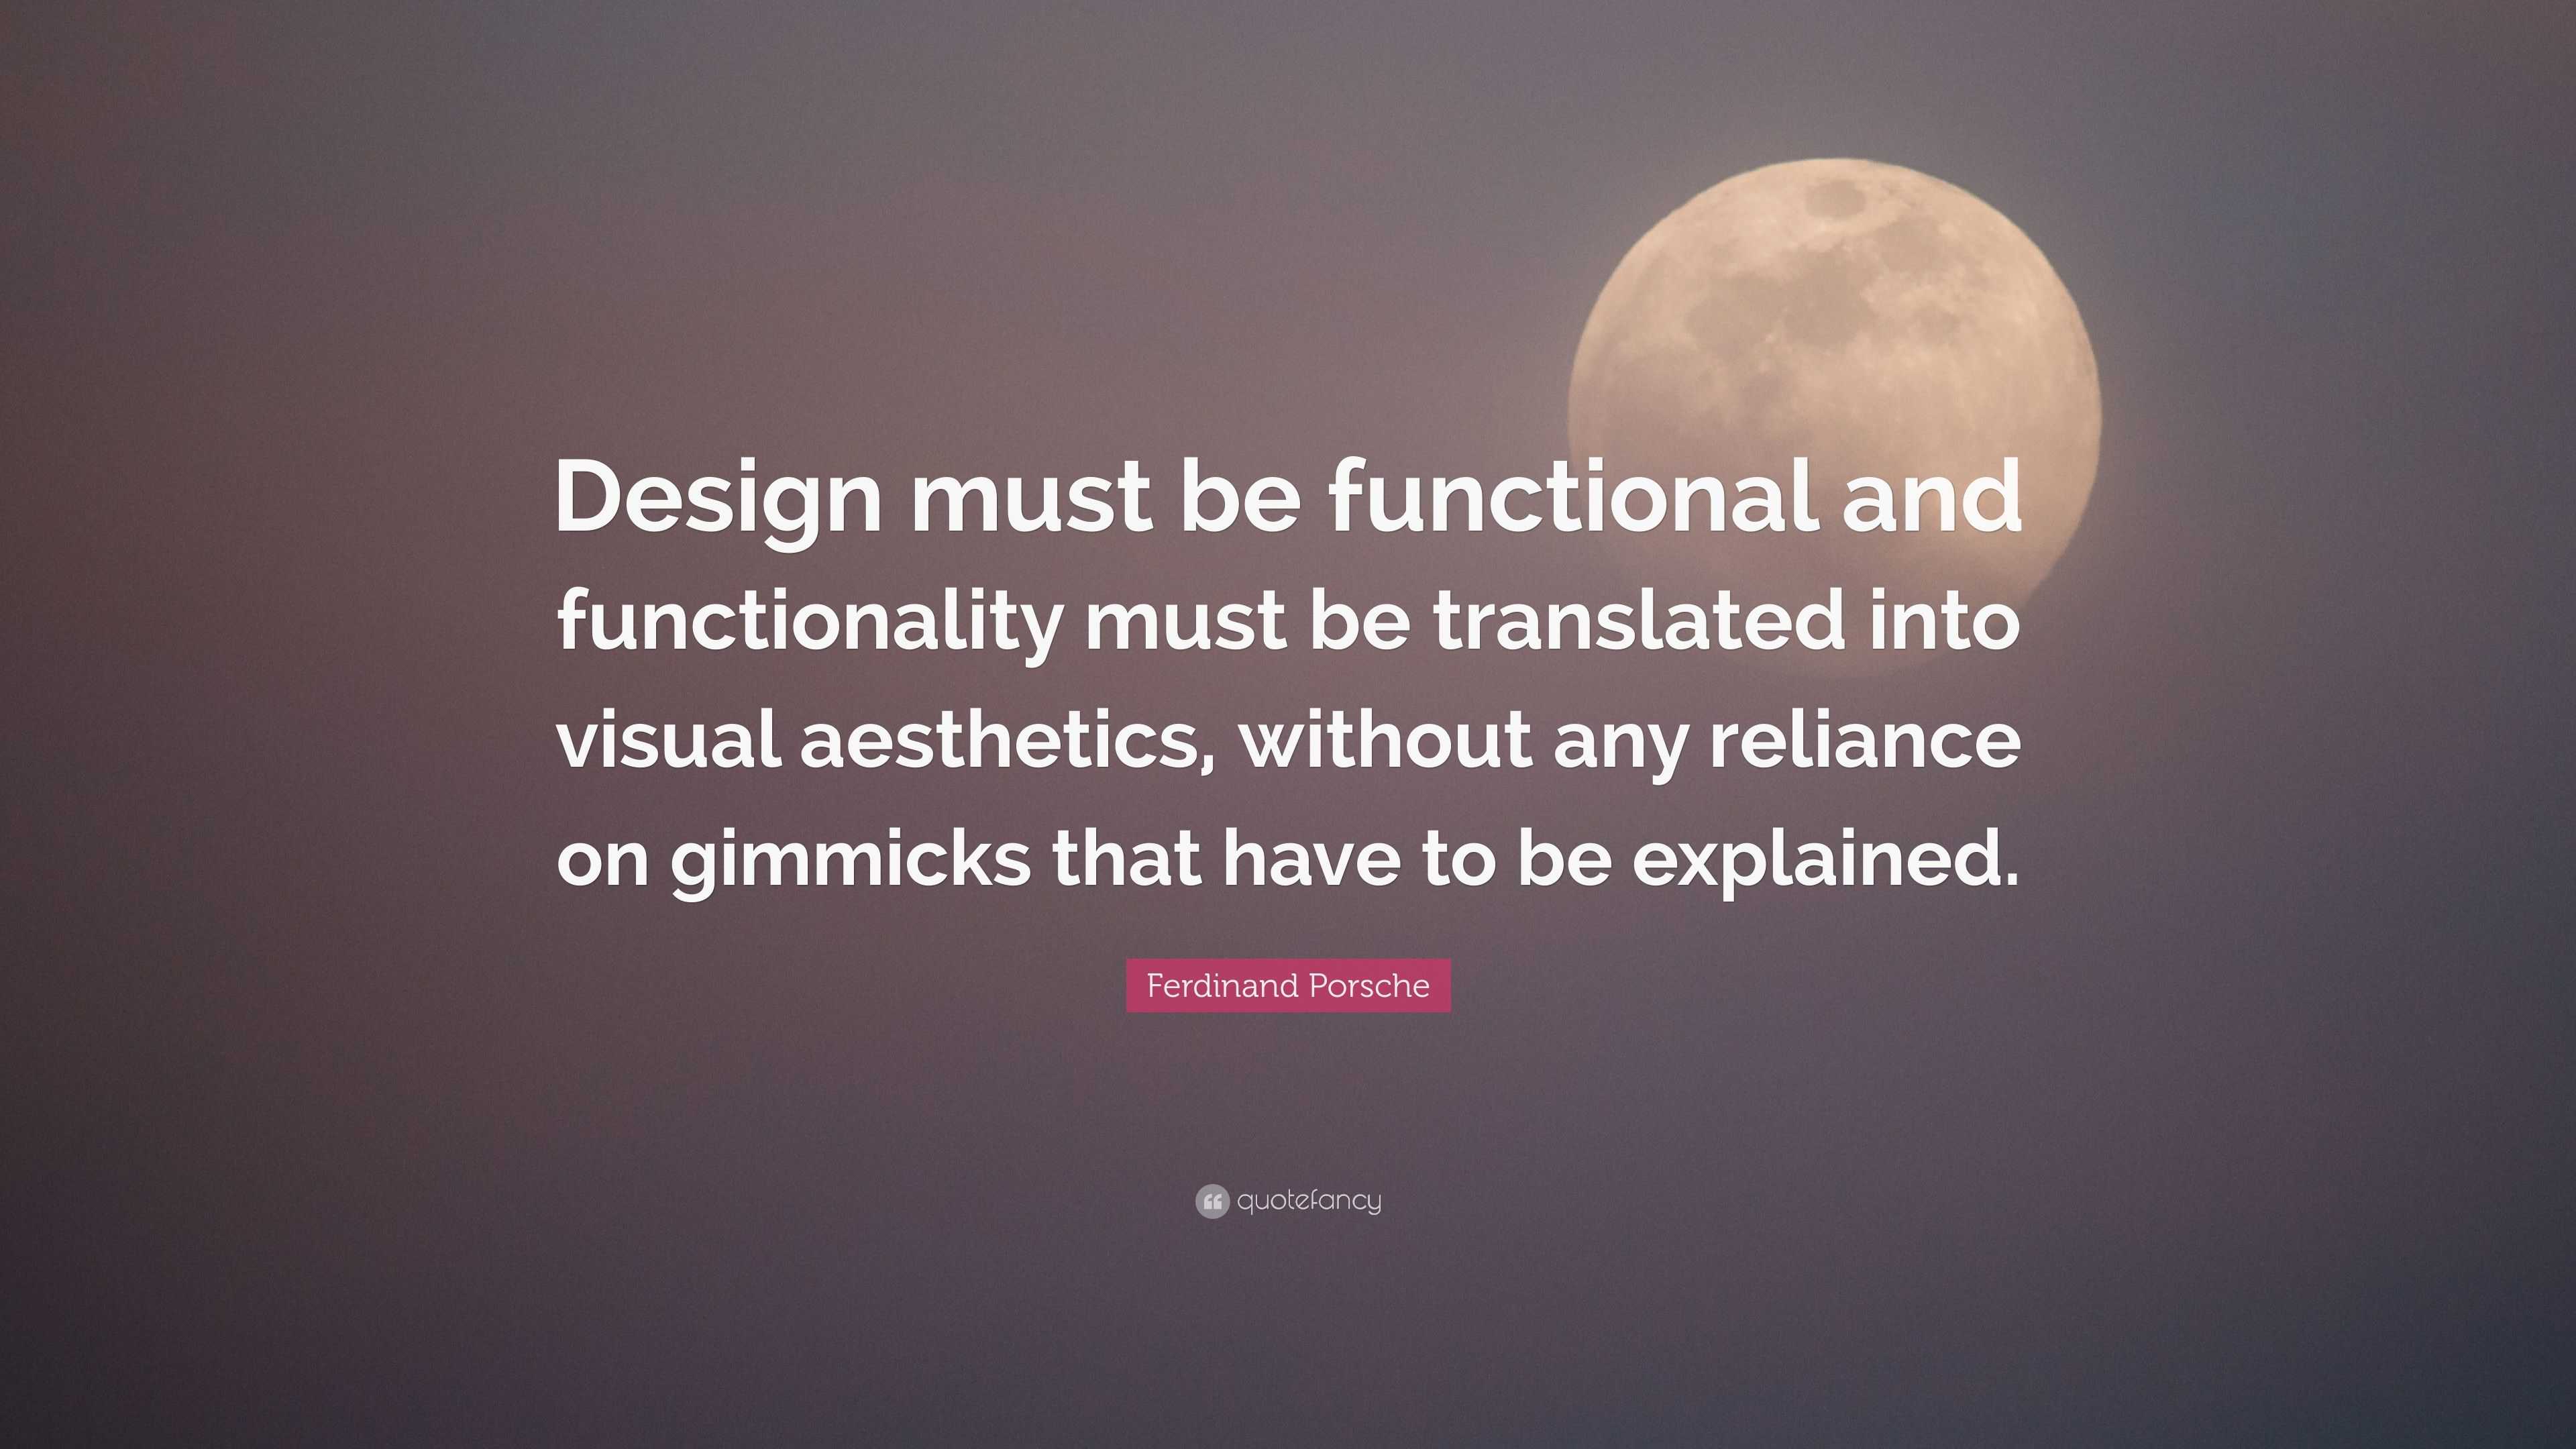 Ferdinand Porsche Quote: “Design must be functional and functionality